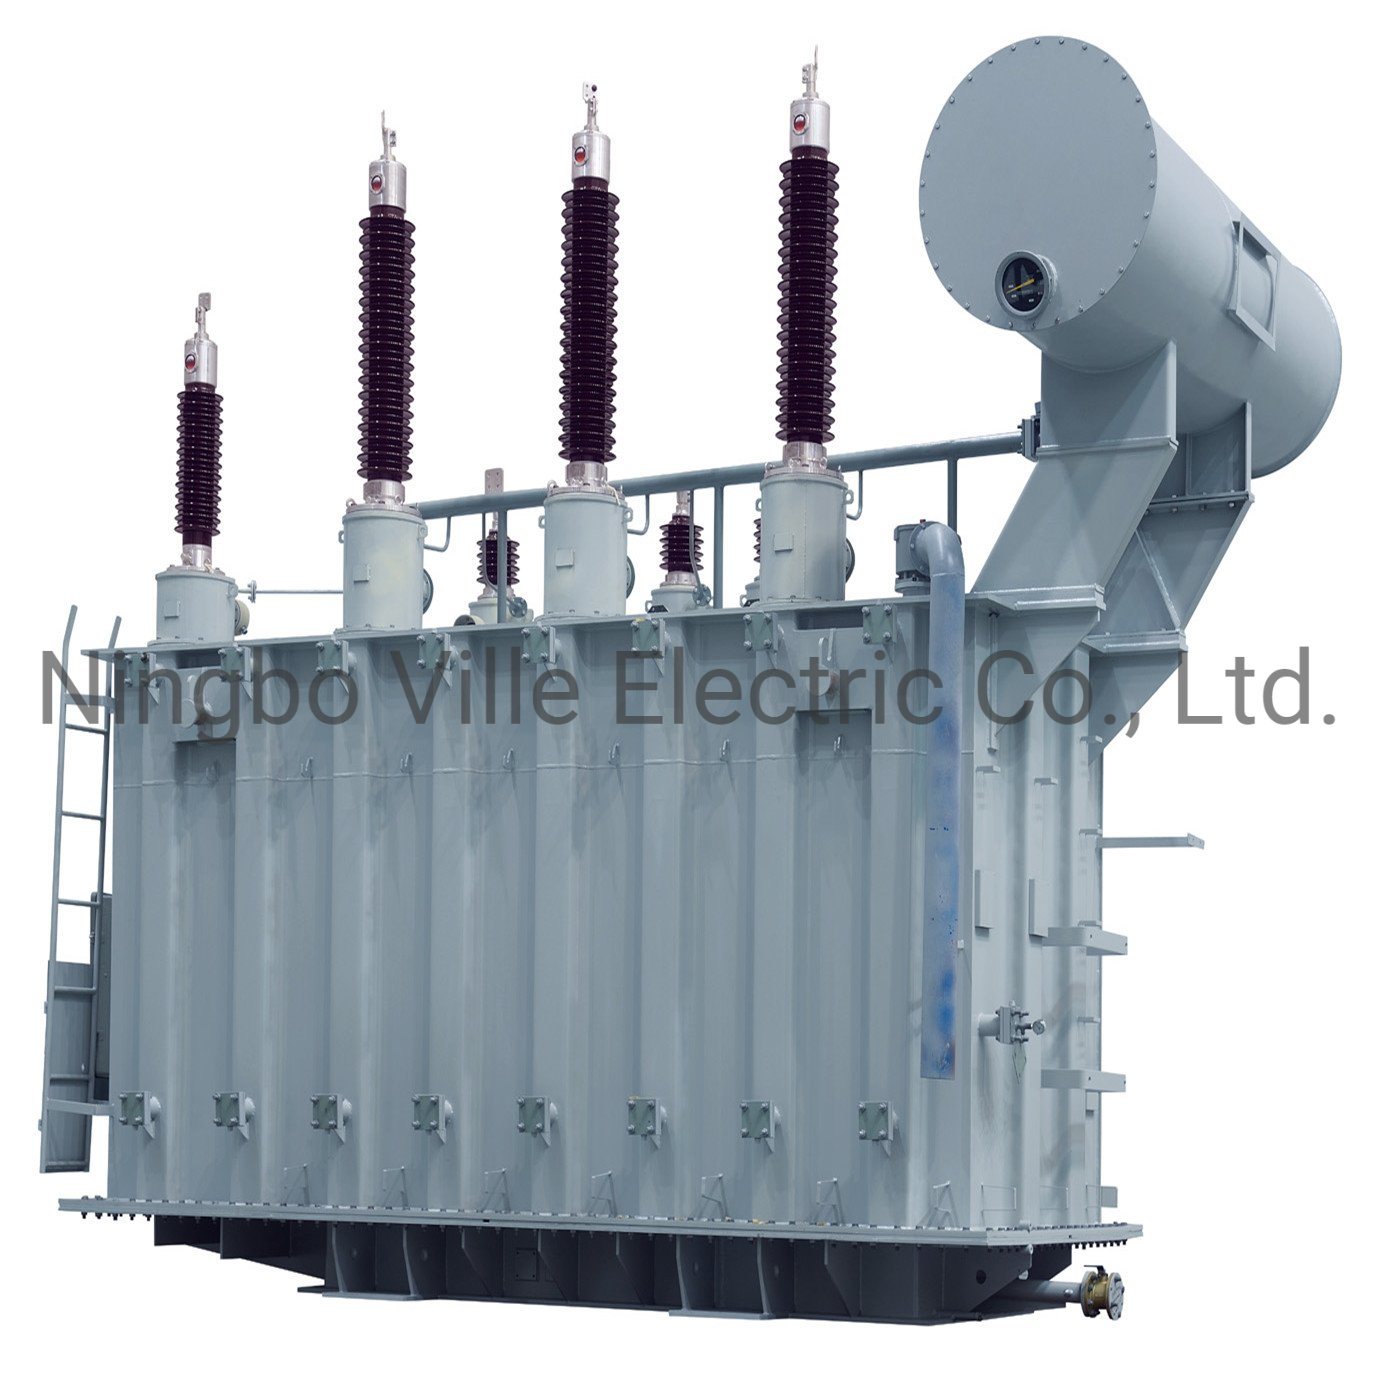 40mva 220kv 3phase 3winding Power Transformer with on Load Tap Changer